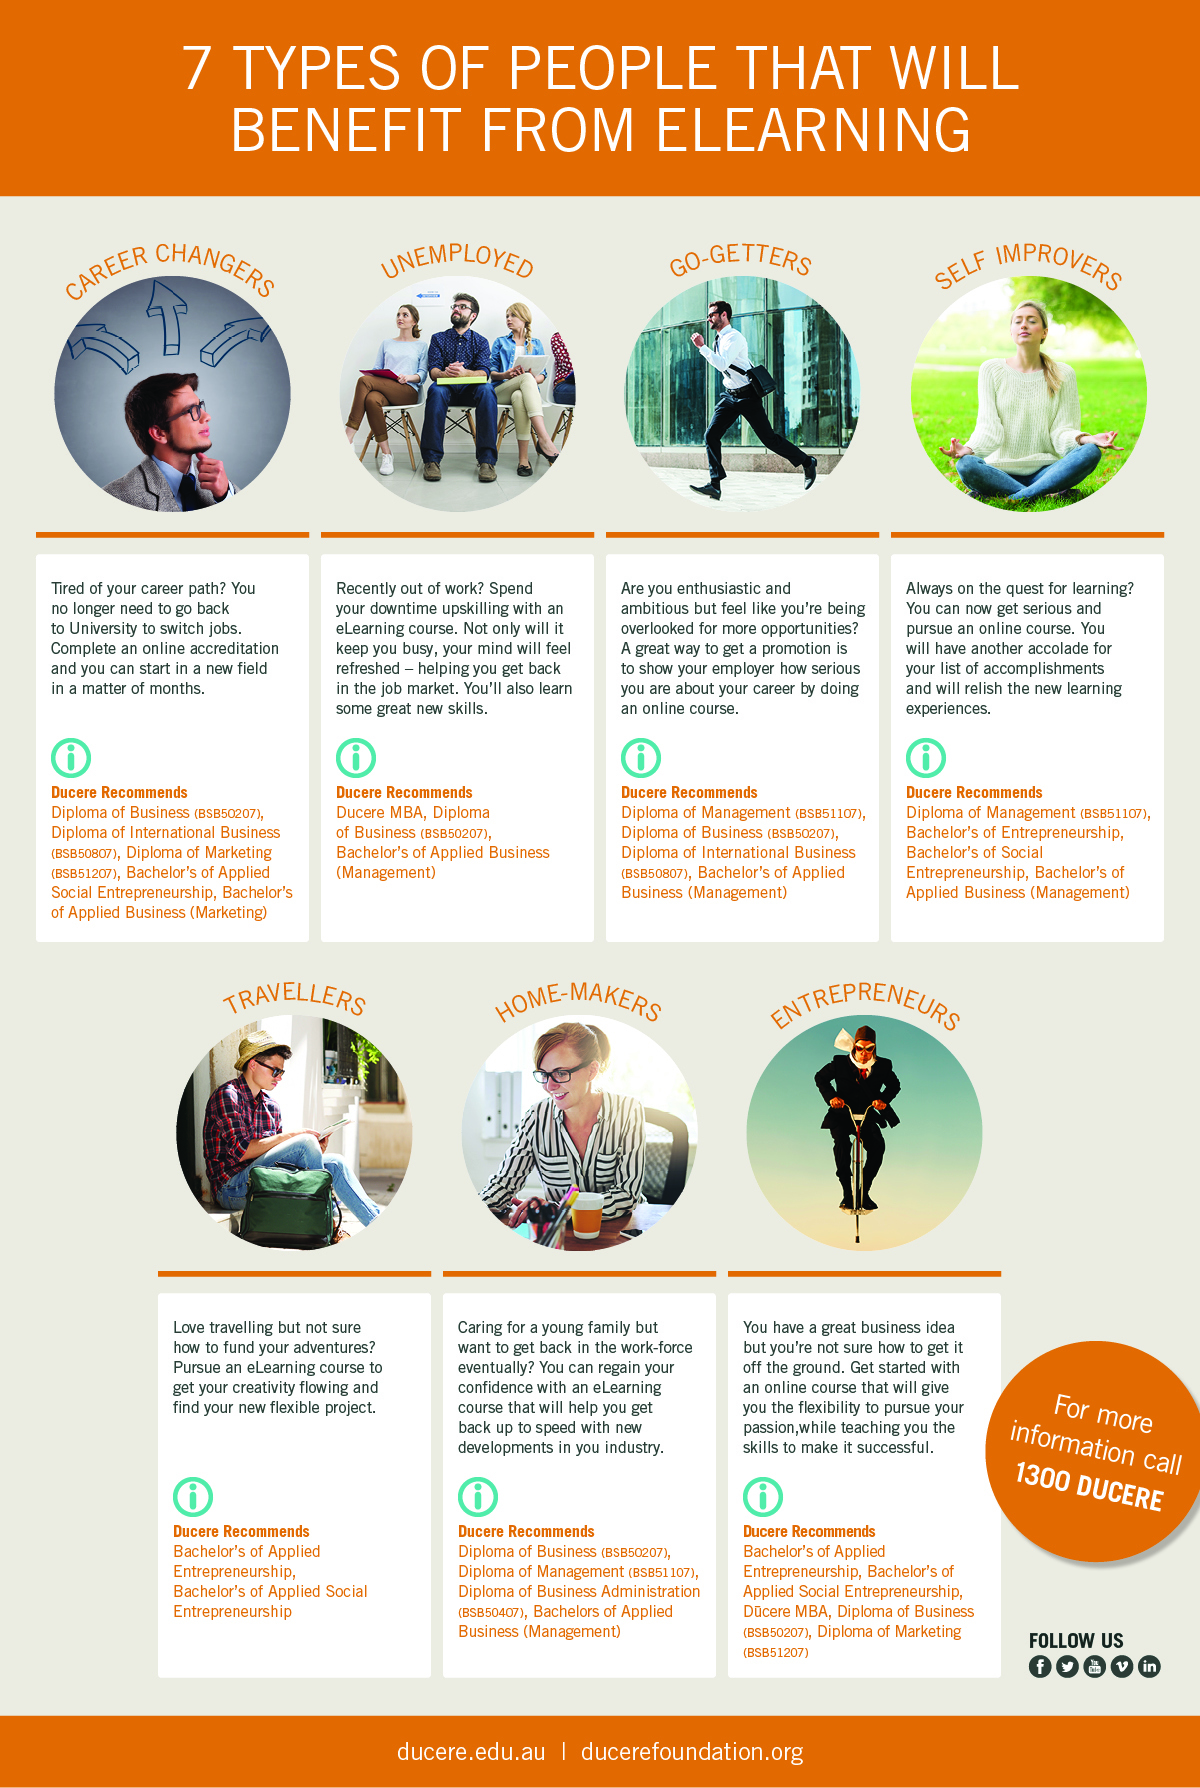 7 Types of People that Will Benefit from eLearning Infographic